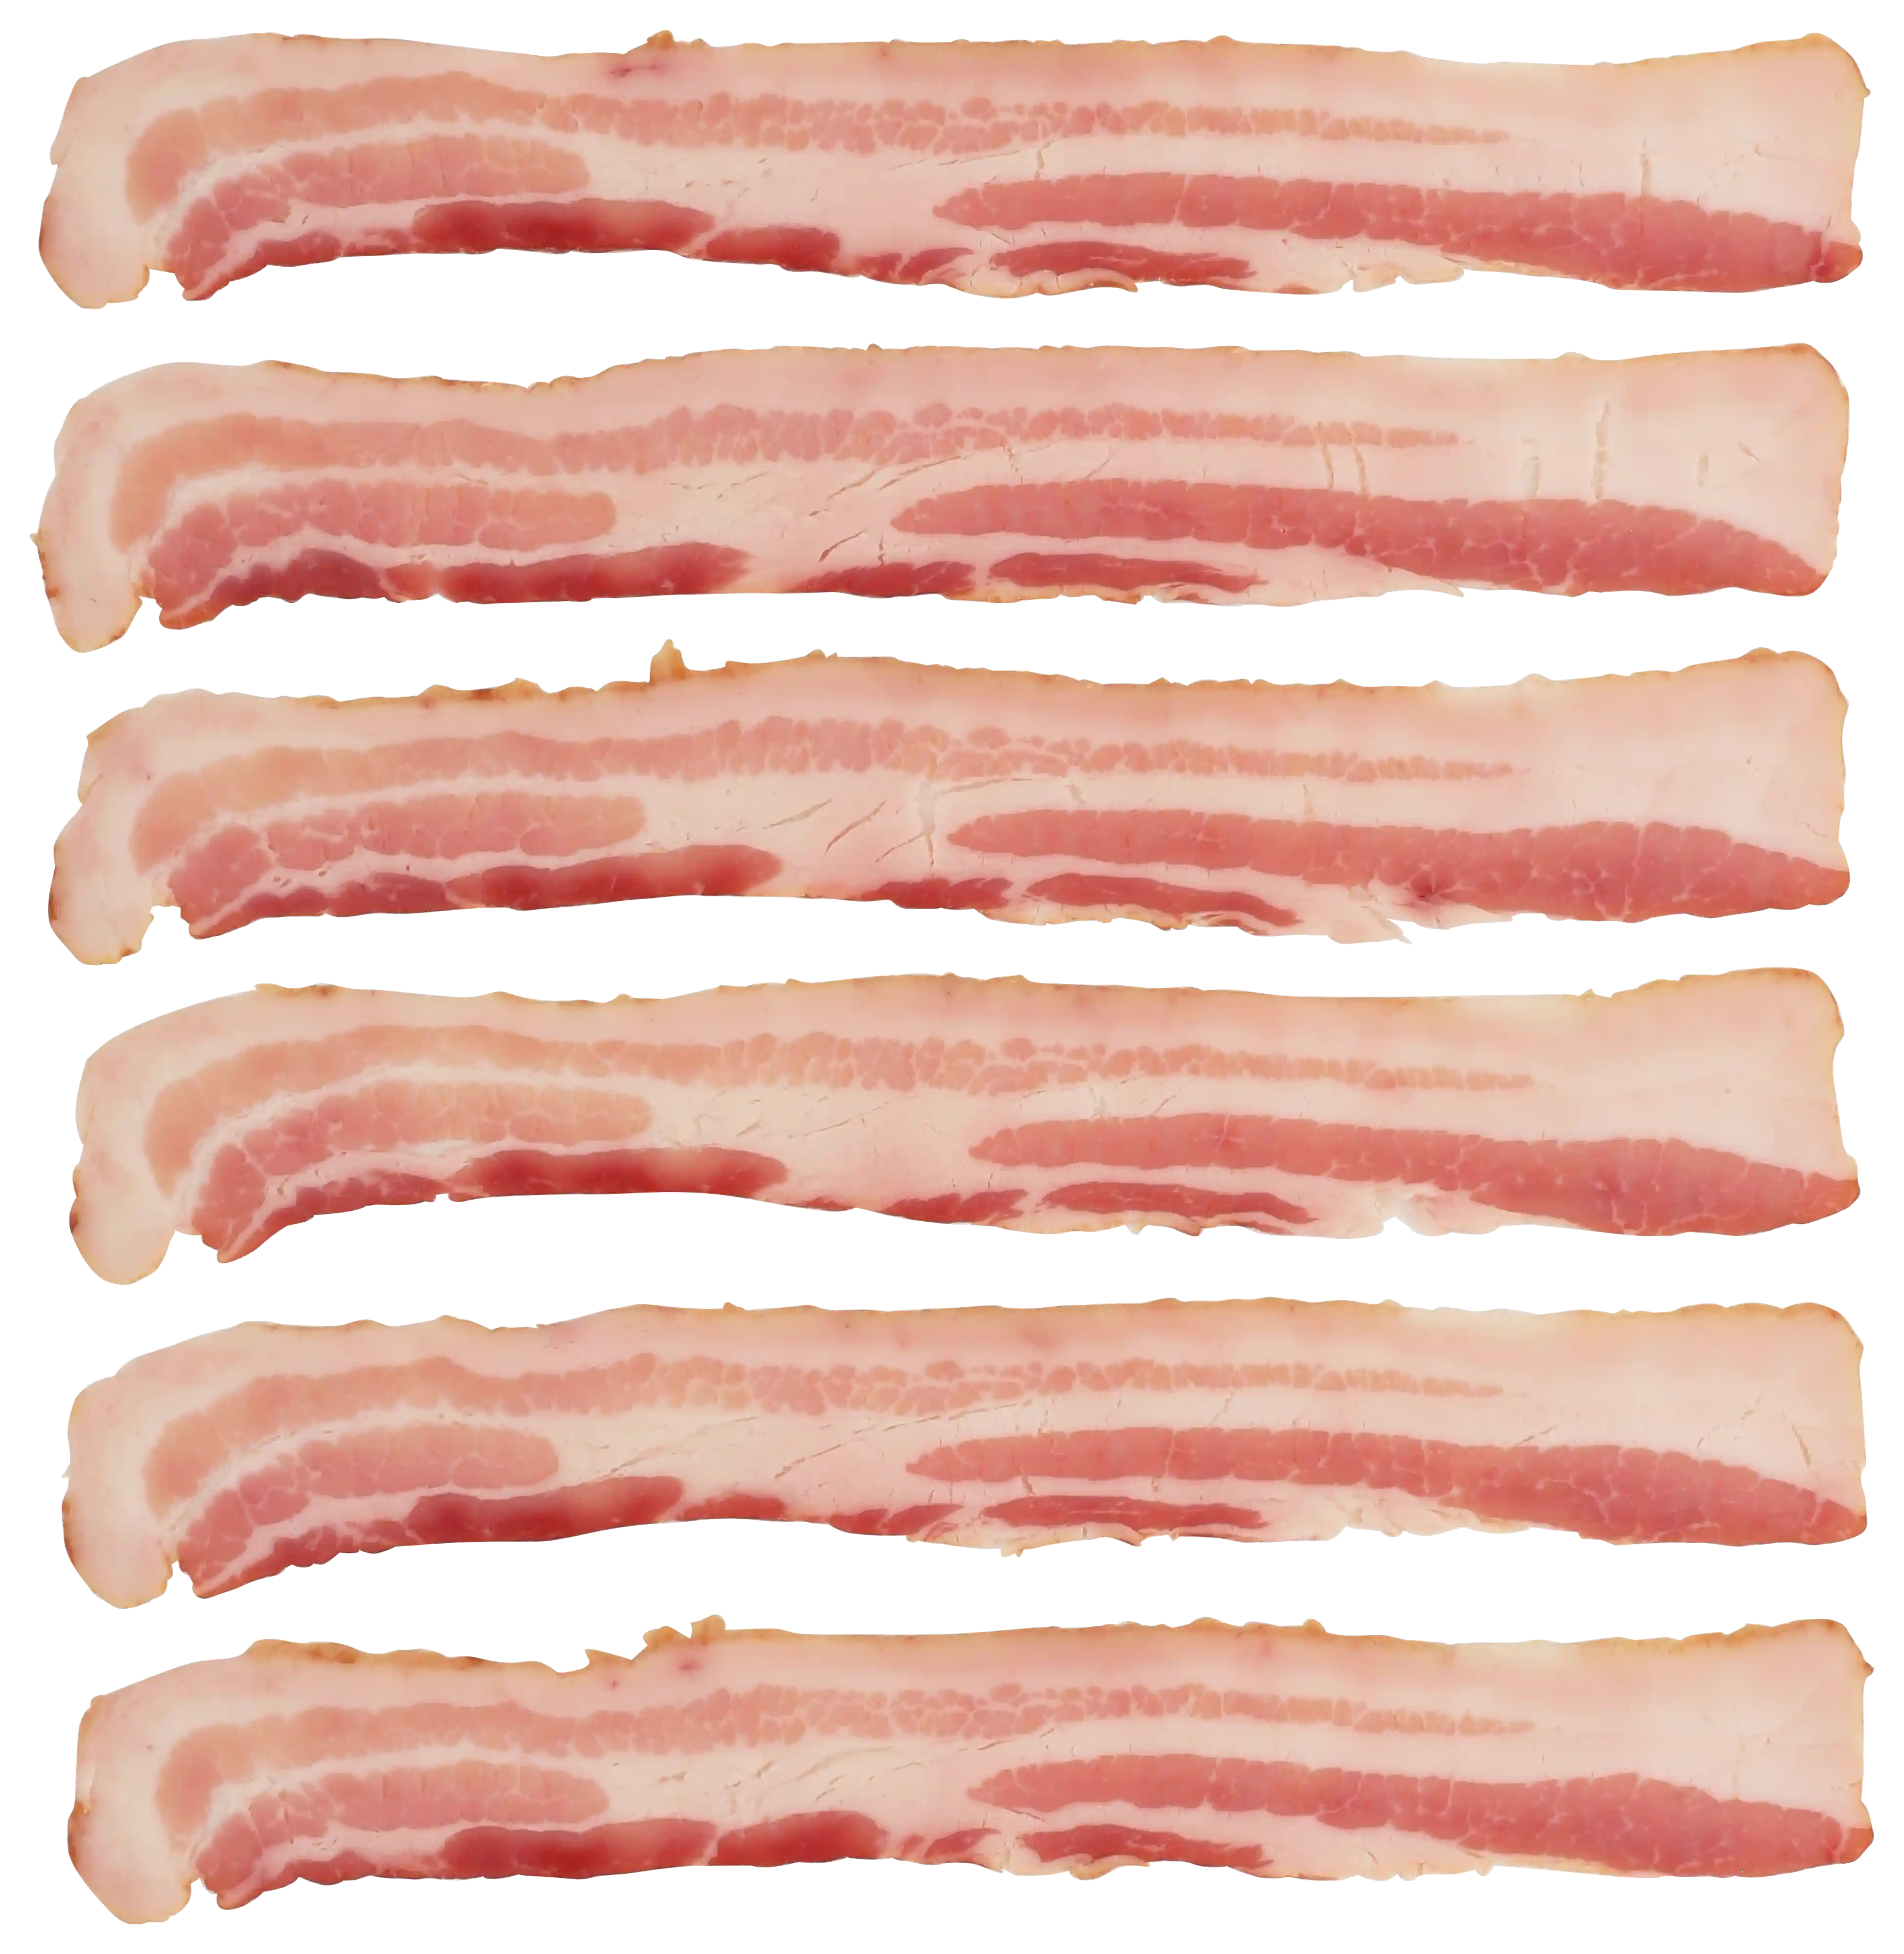 Wright® Brand Naturally Applewood Smoked Thin Sliced Bacon, Bulk, 15Lbs, 18-22 Slices per pound, Gas Flushed_image_11